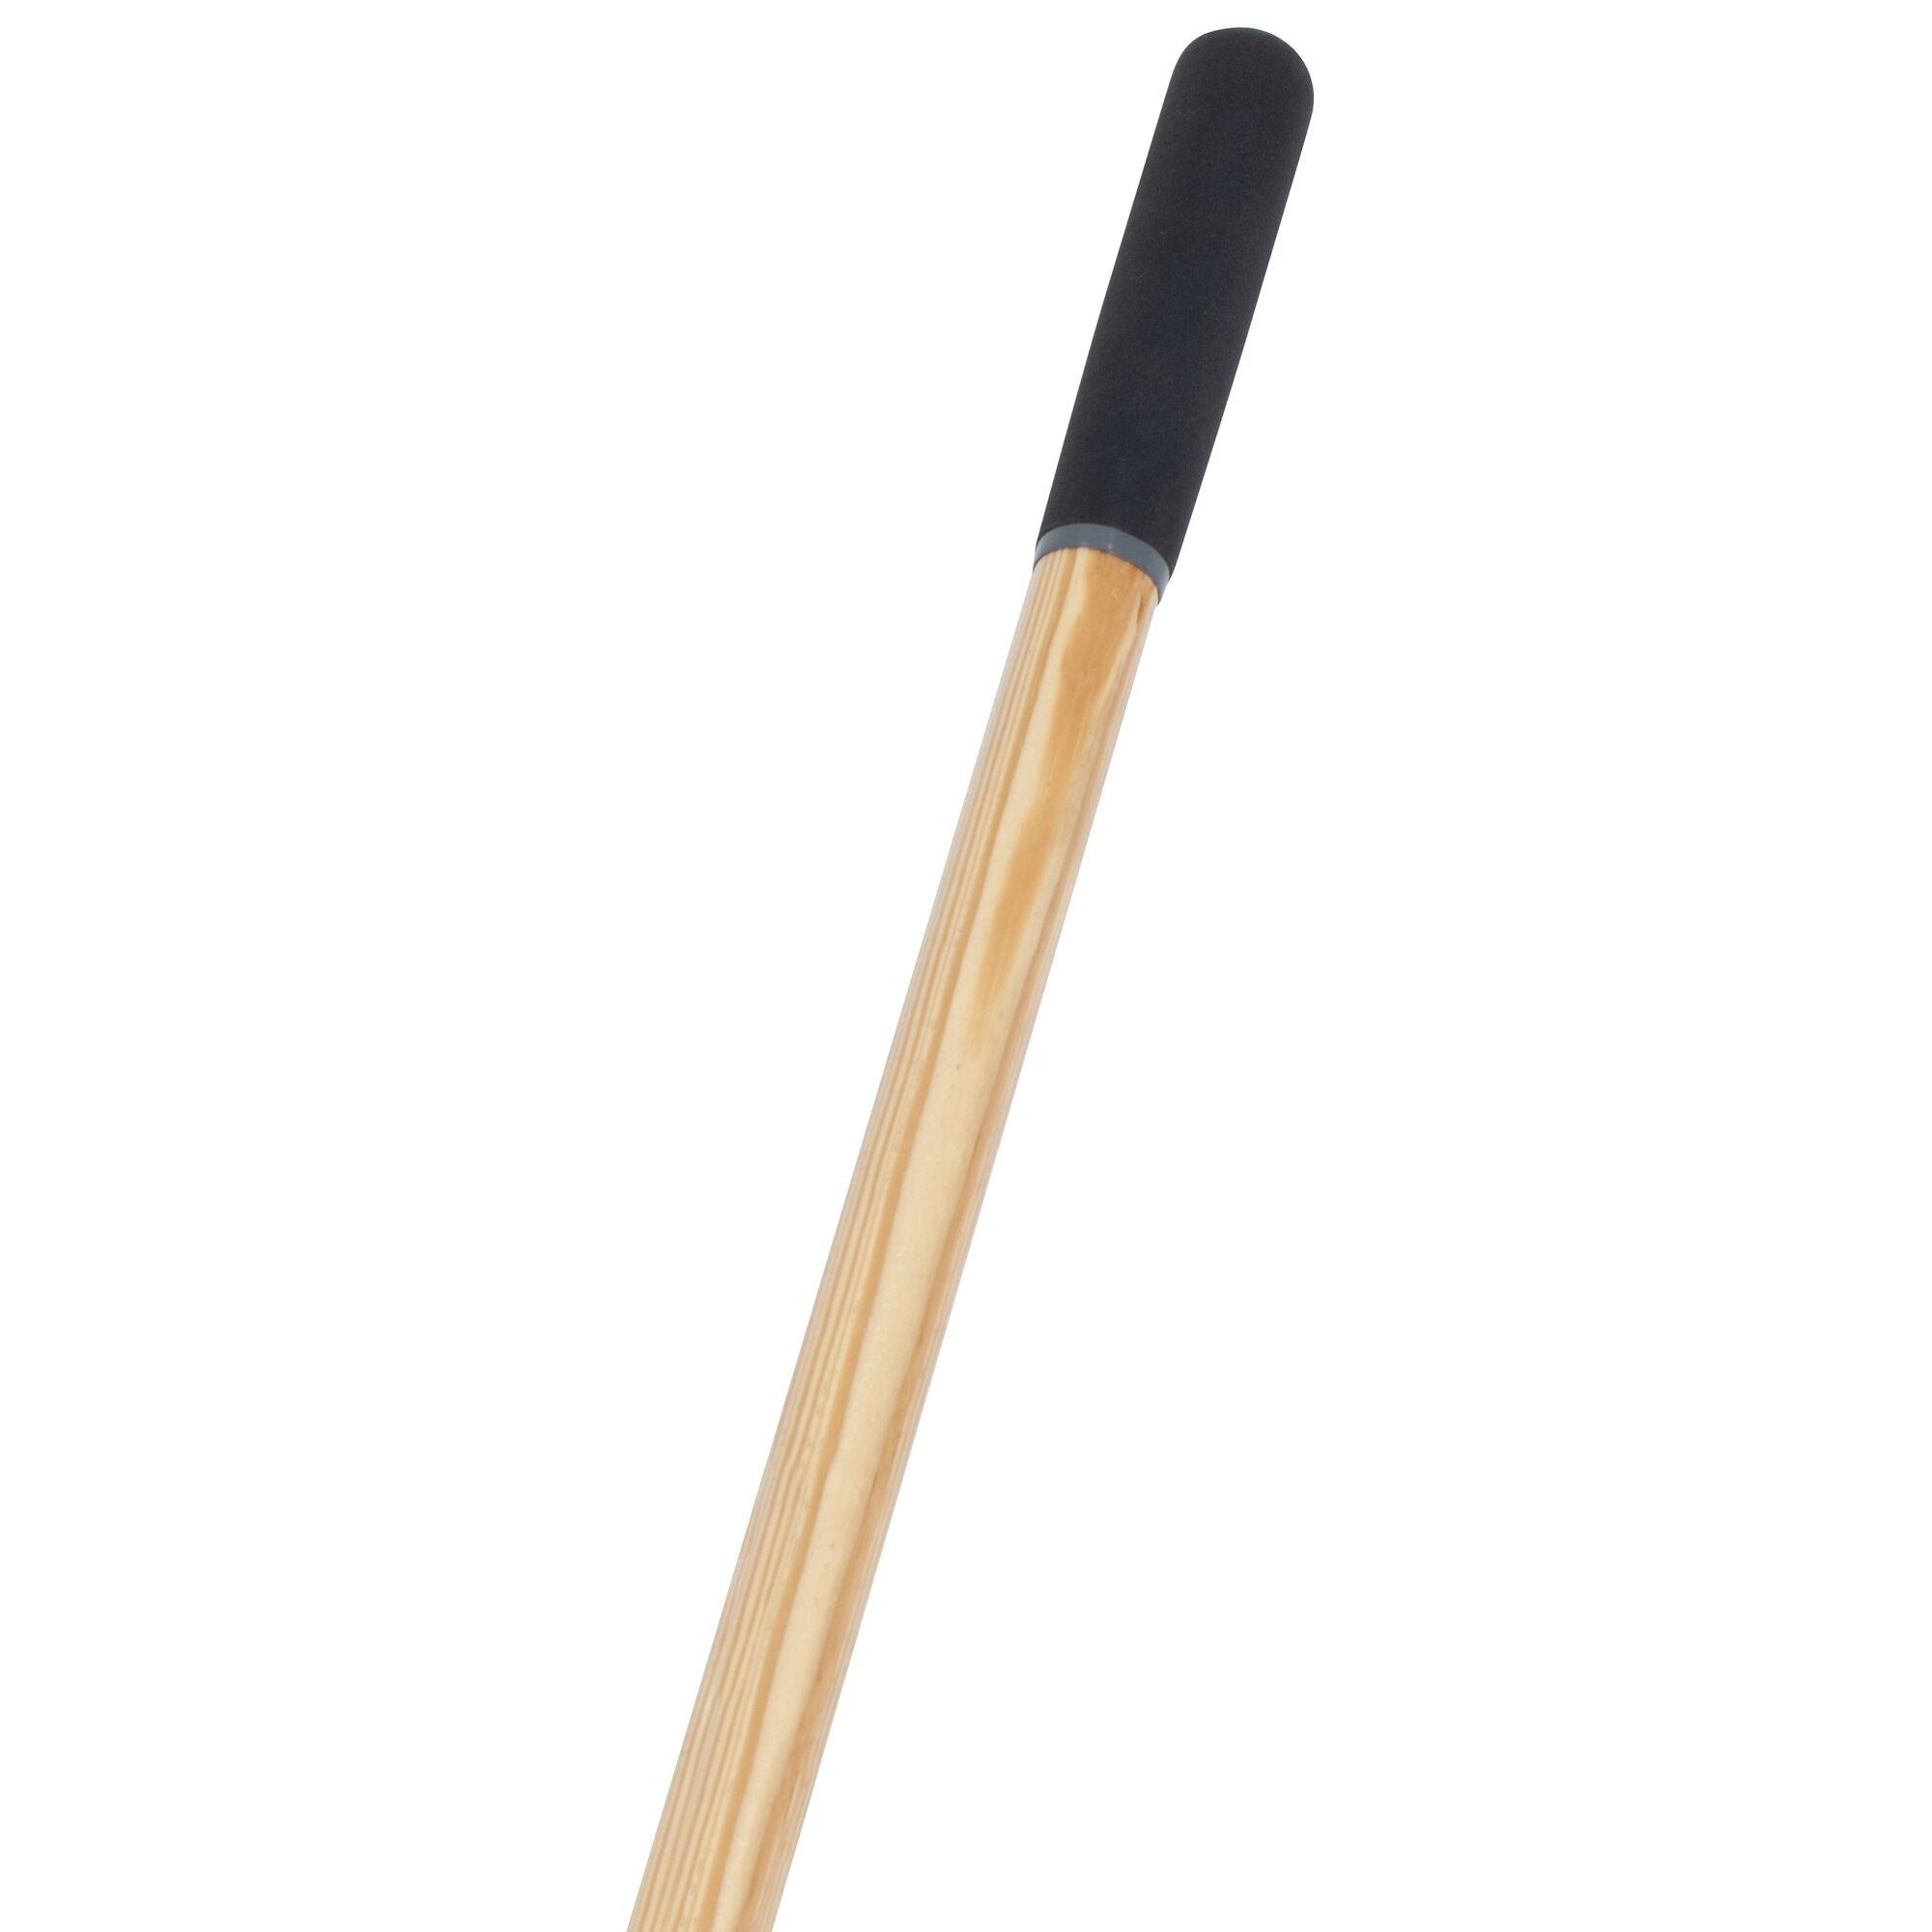 18 inch all-purpose push broom's wooden handle with cushion grip on end